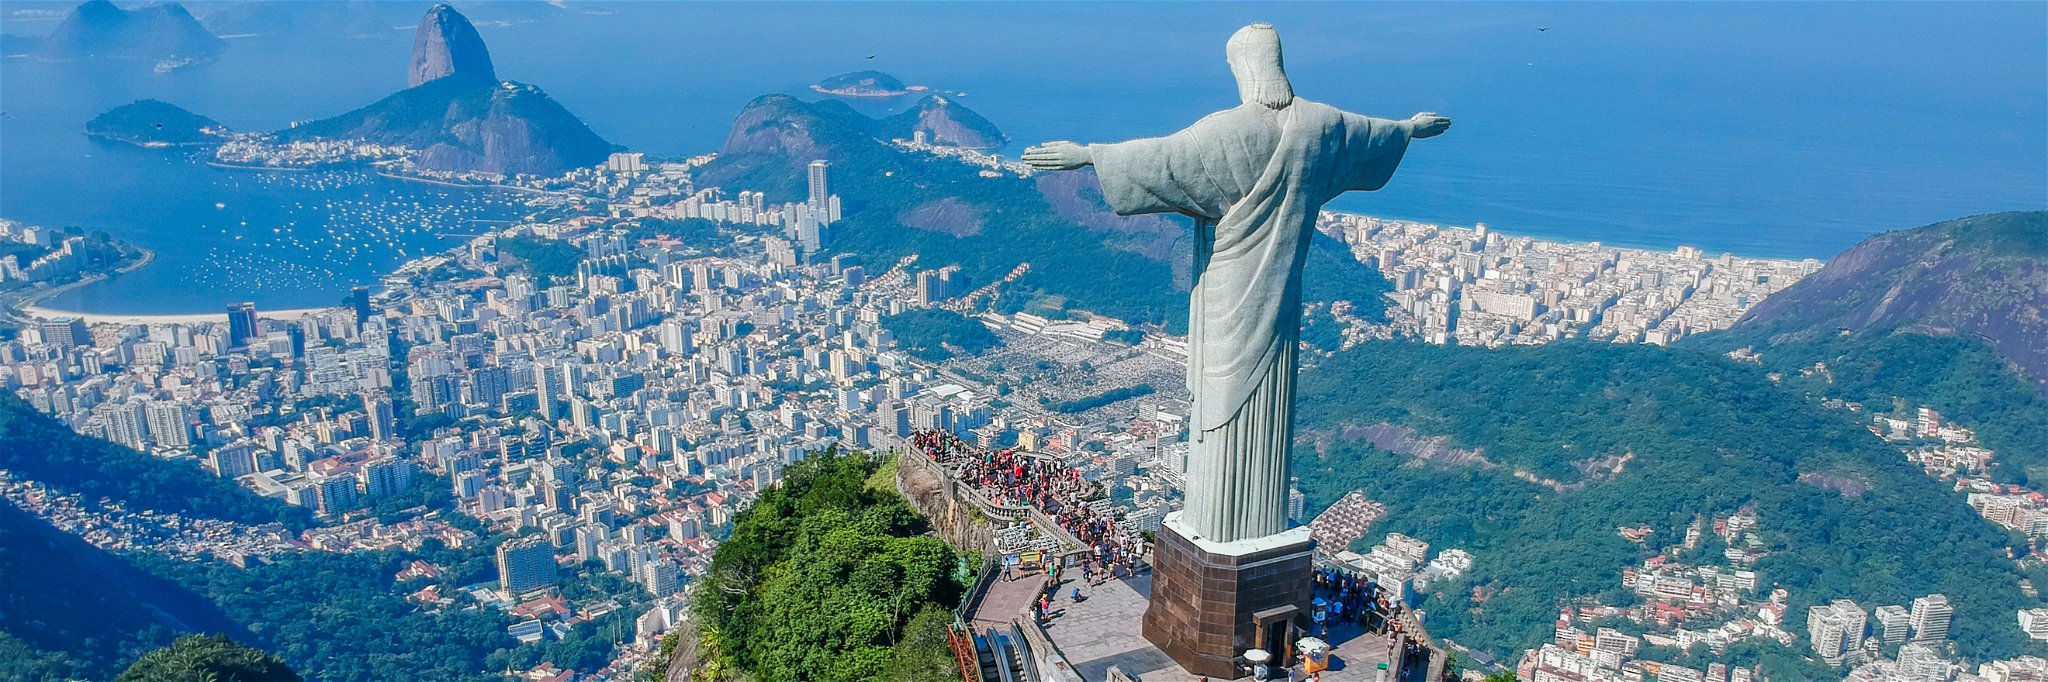 The famous statue of Christ the Redeemer overlooking Rio de Janeiro is no longer the tallest.